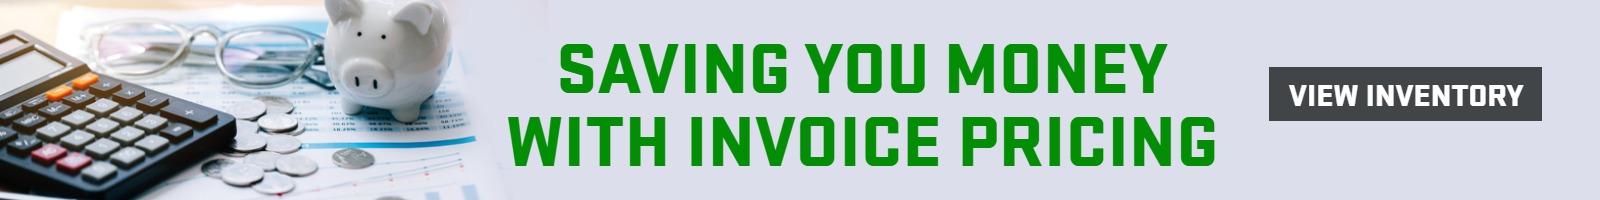 Saving you money with Invoice Pricing